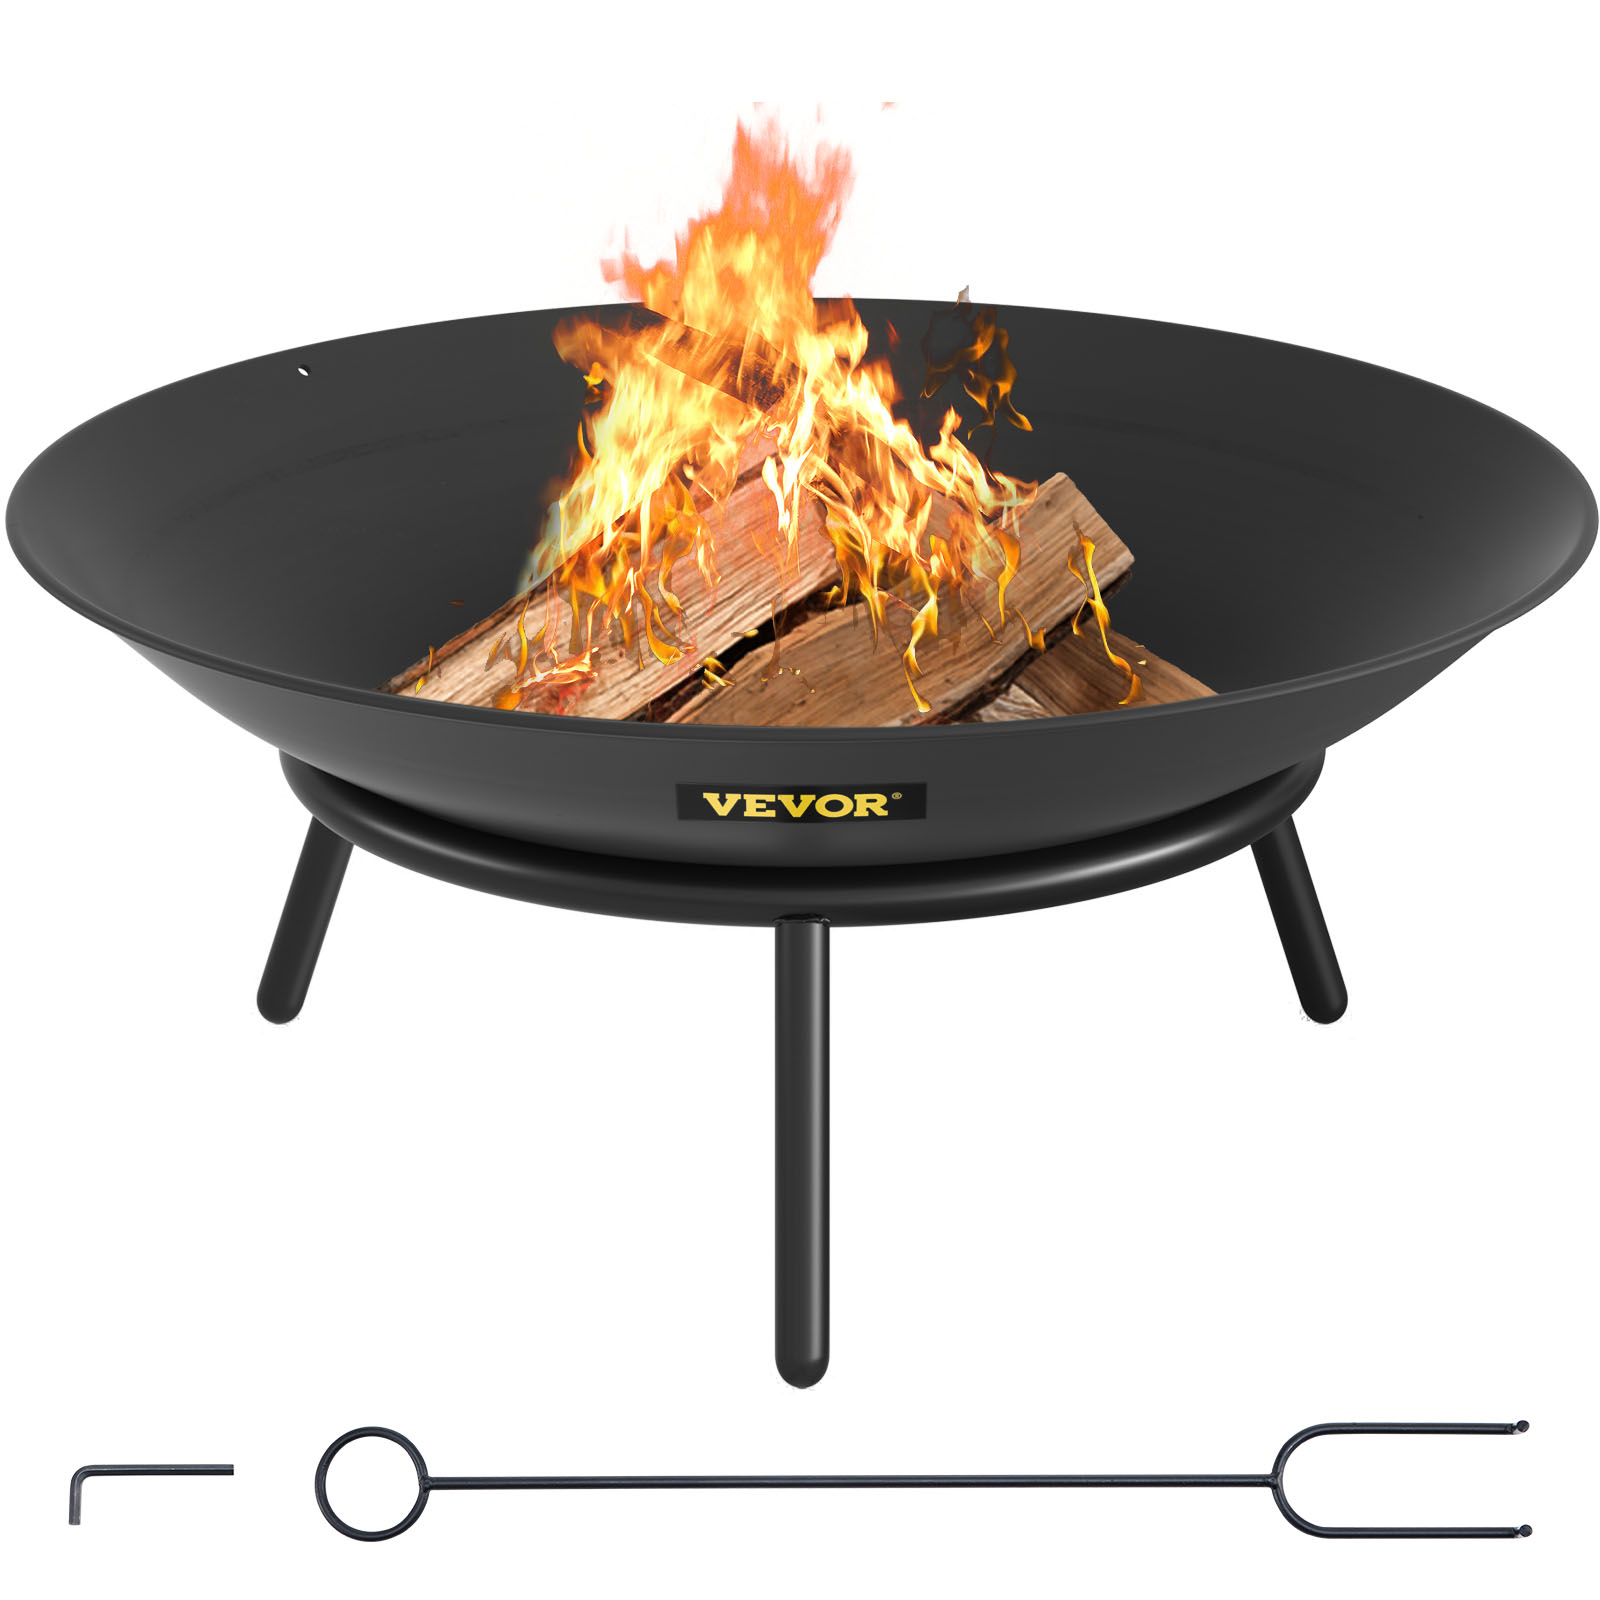 VEVOR Fire Pit Bowl Round Fire Pit 22-Inch Carbon Steel Outdoor Patio Portable от Vevor Many GEOs